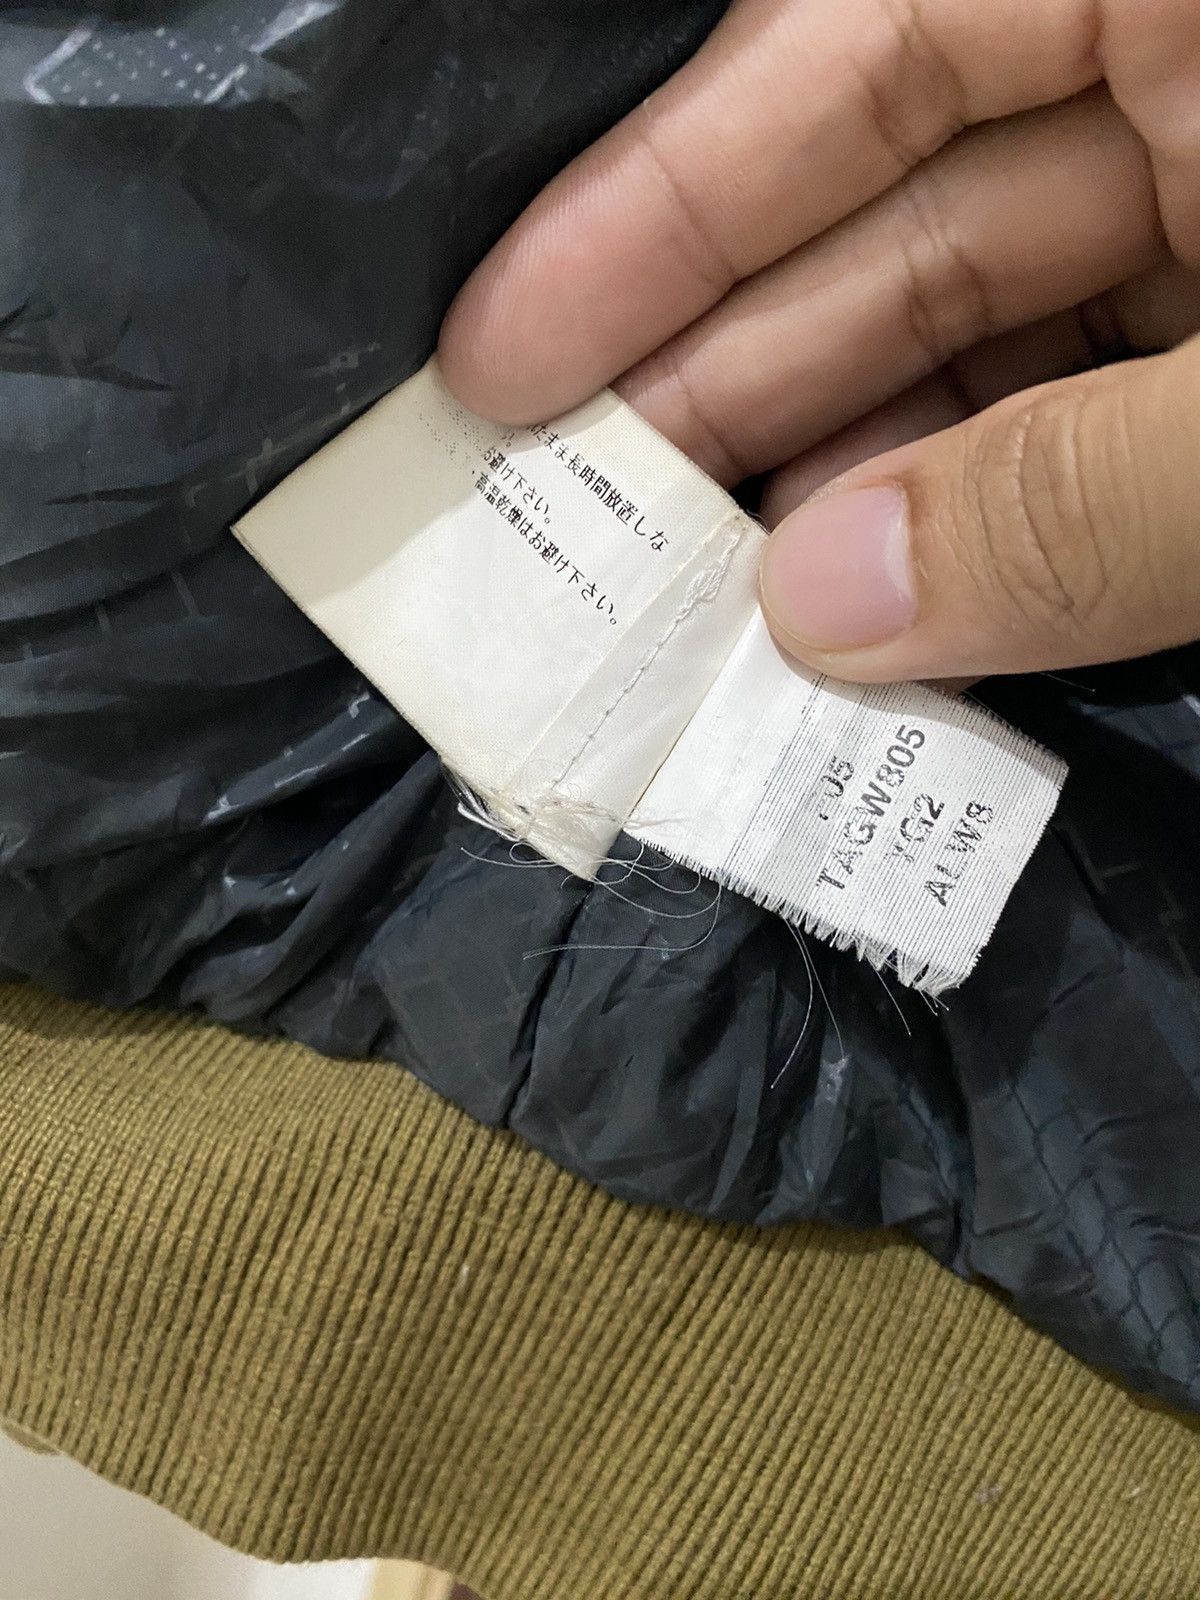 The North Face Ma-1 Jacket Design Military Olive Green - 11